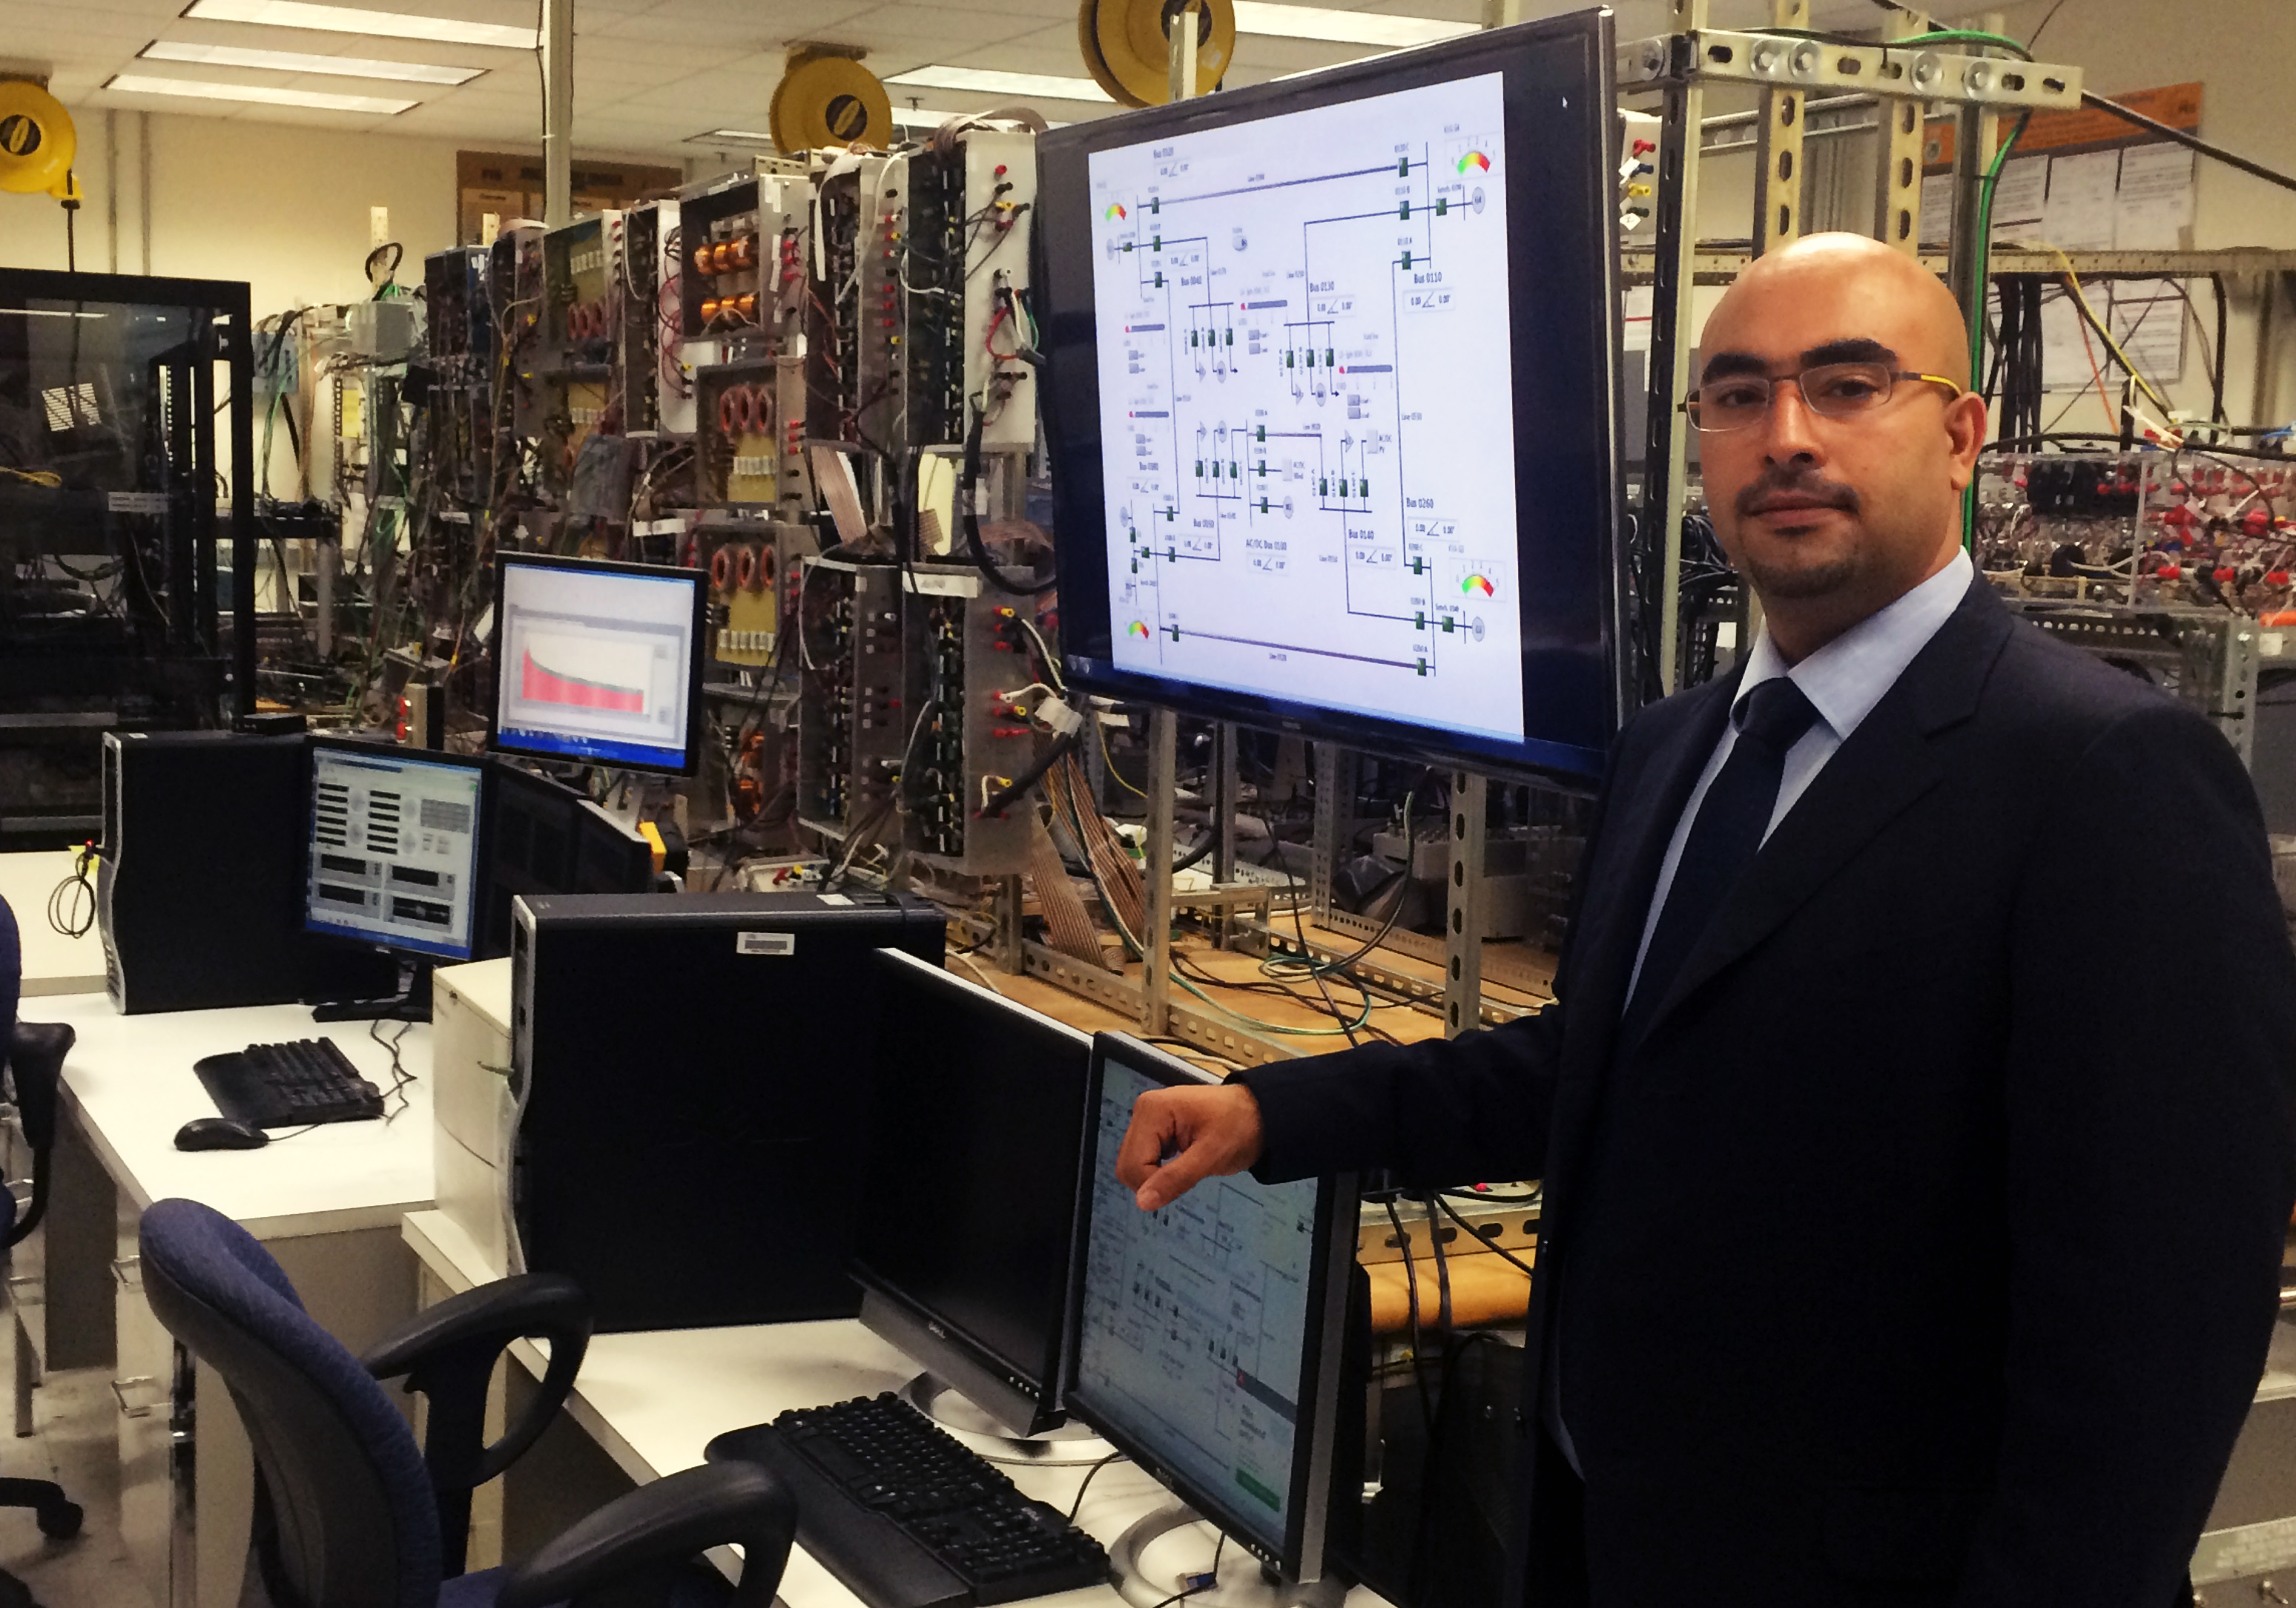 Dr Ali Mazloomzadeh Post Doctoral Research Fellow at Esrl Joins Smart Utility Systems